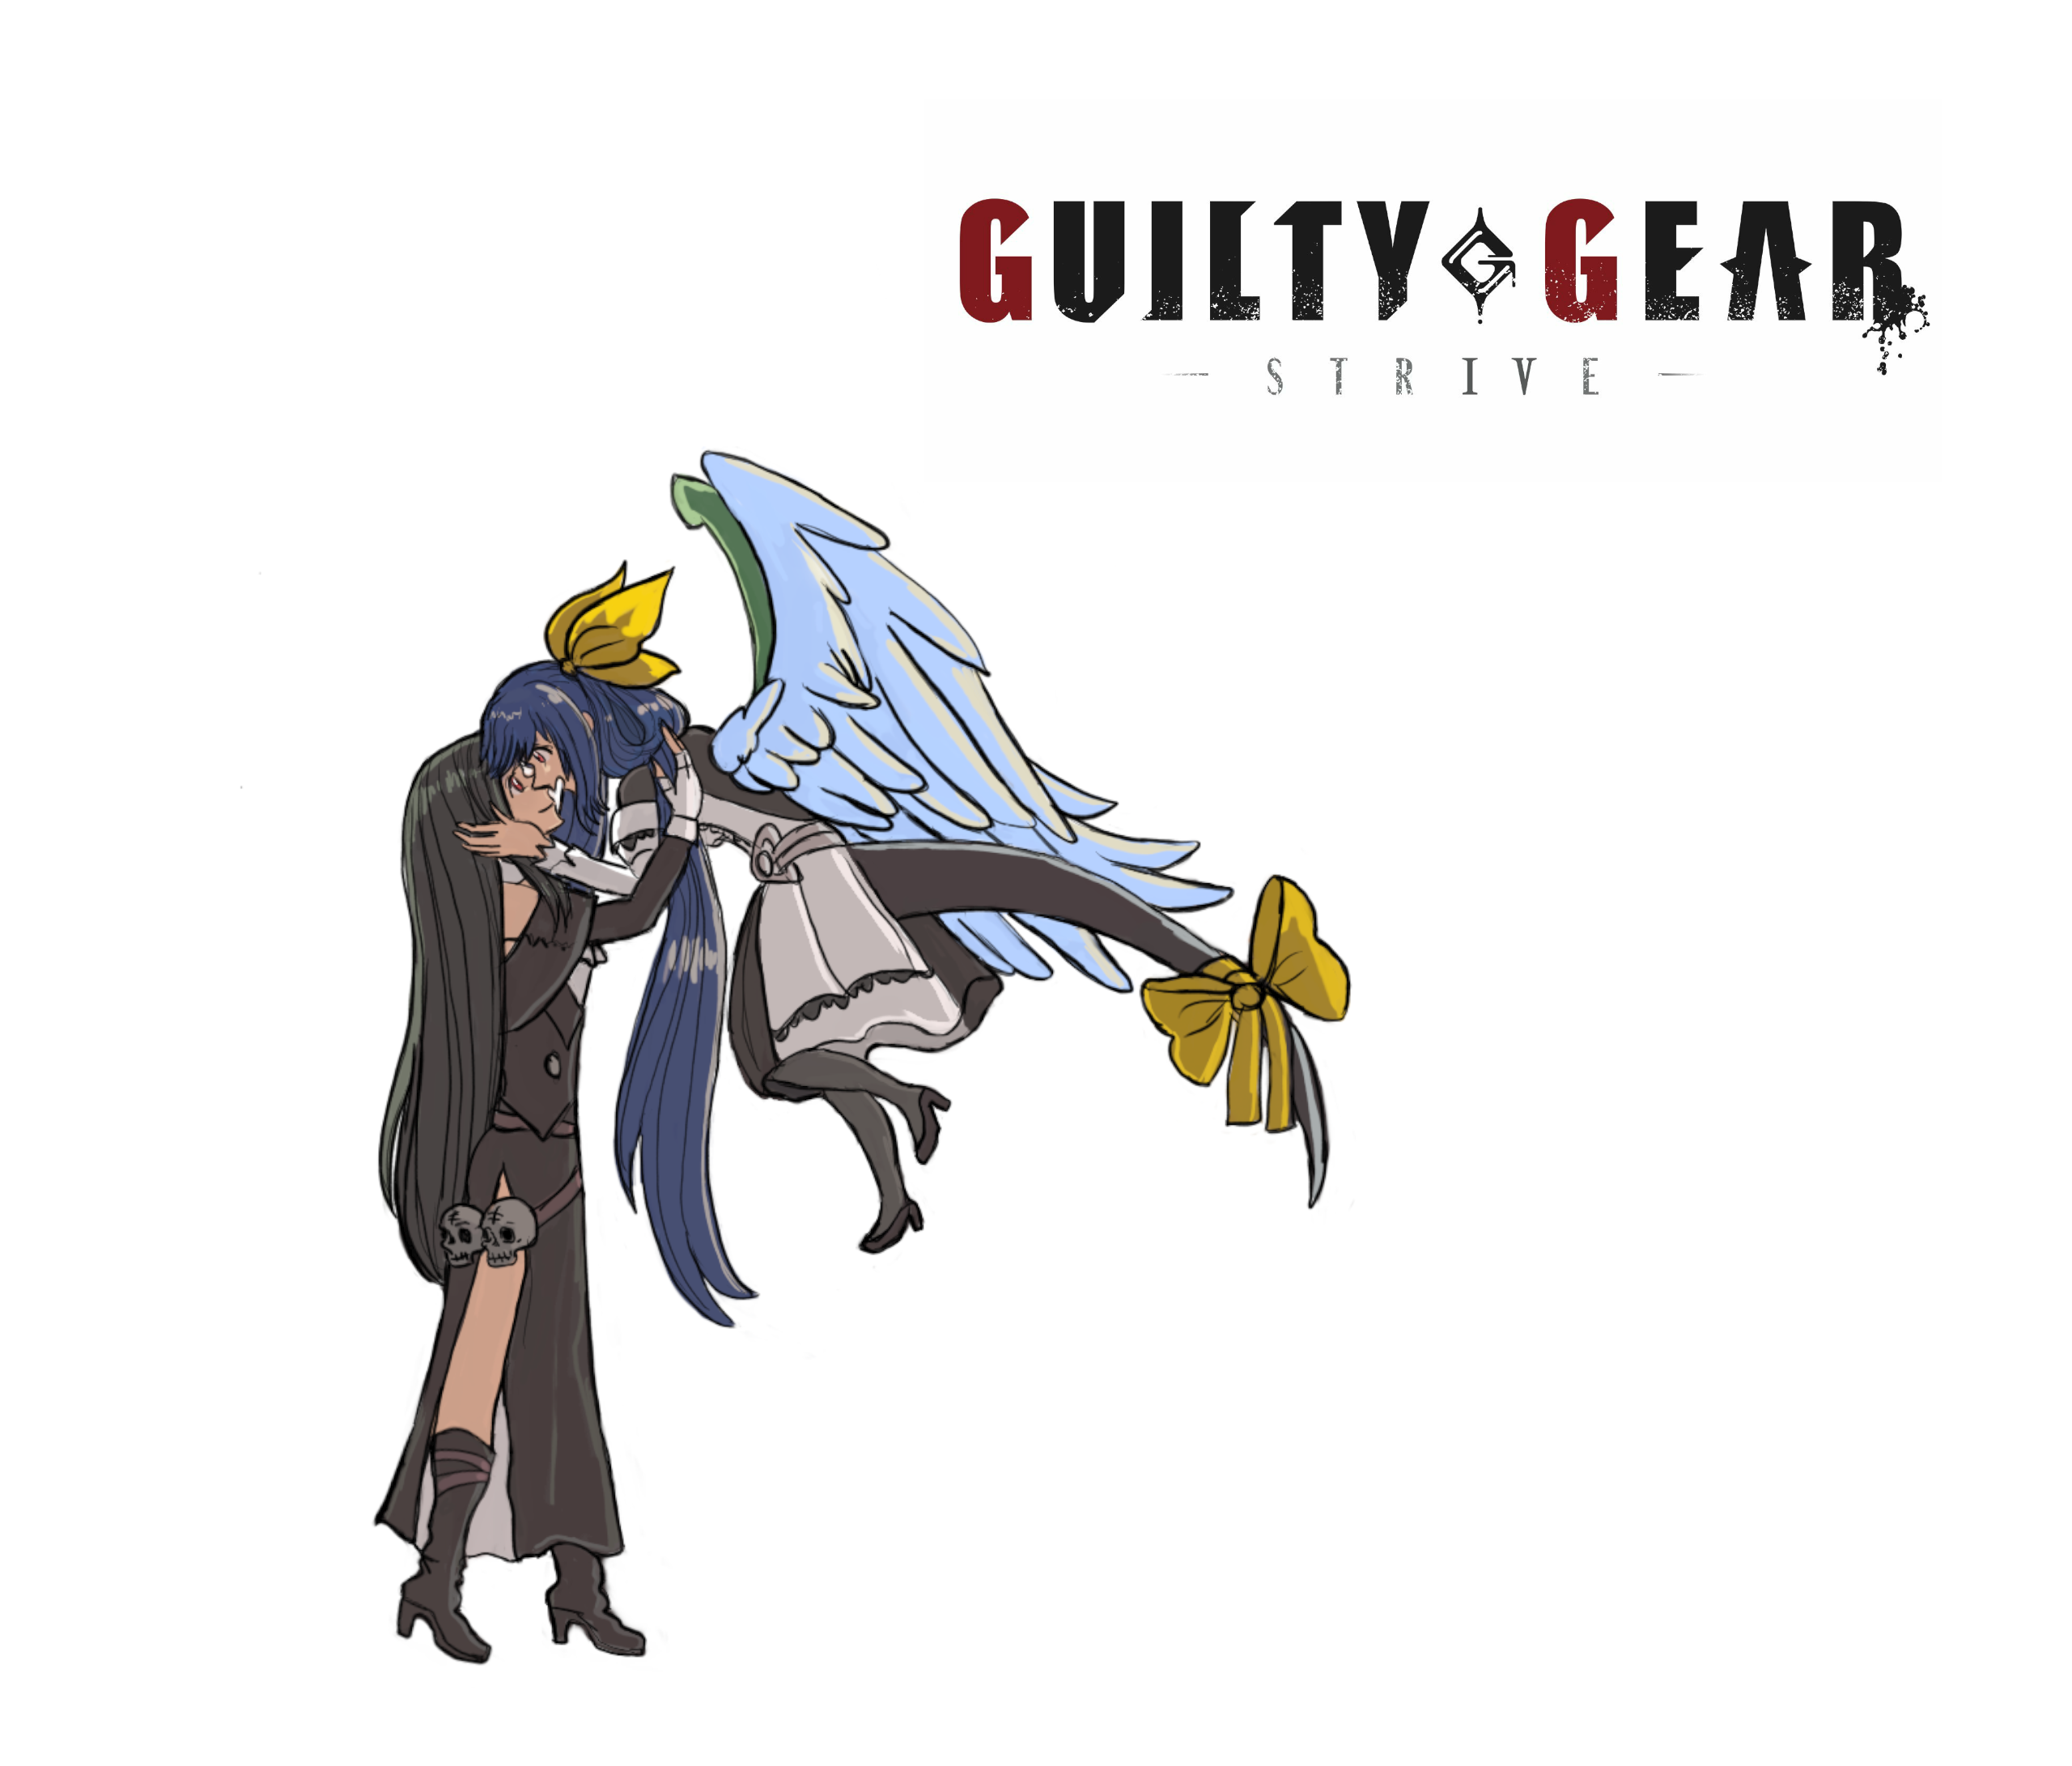 Anime 2560x2182 Guilty Gear Guilty gear strive anime couple anime girl with wings anime games Dizzy (Guilty Gear) Testament (guilty gear) Testament x Dizzy women wings romance Fighting Games minimalism white background simple background